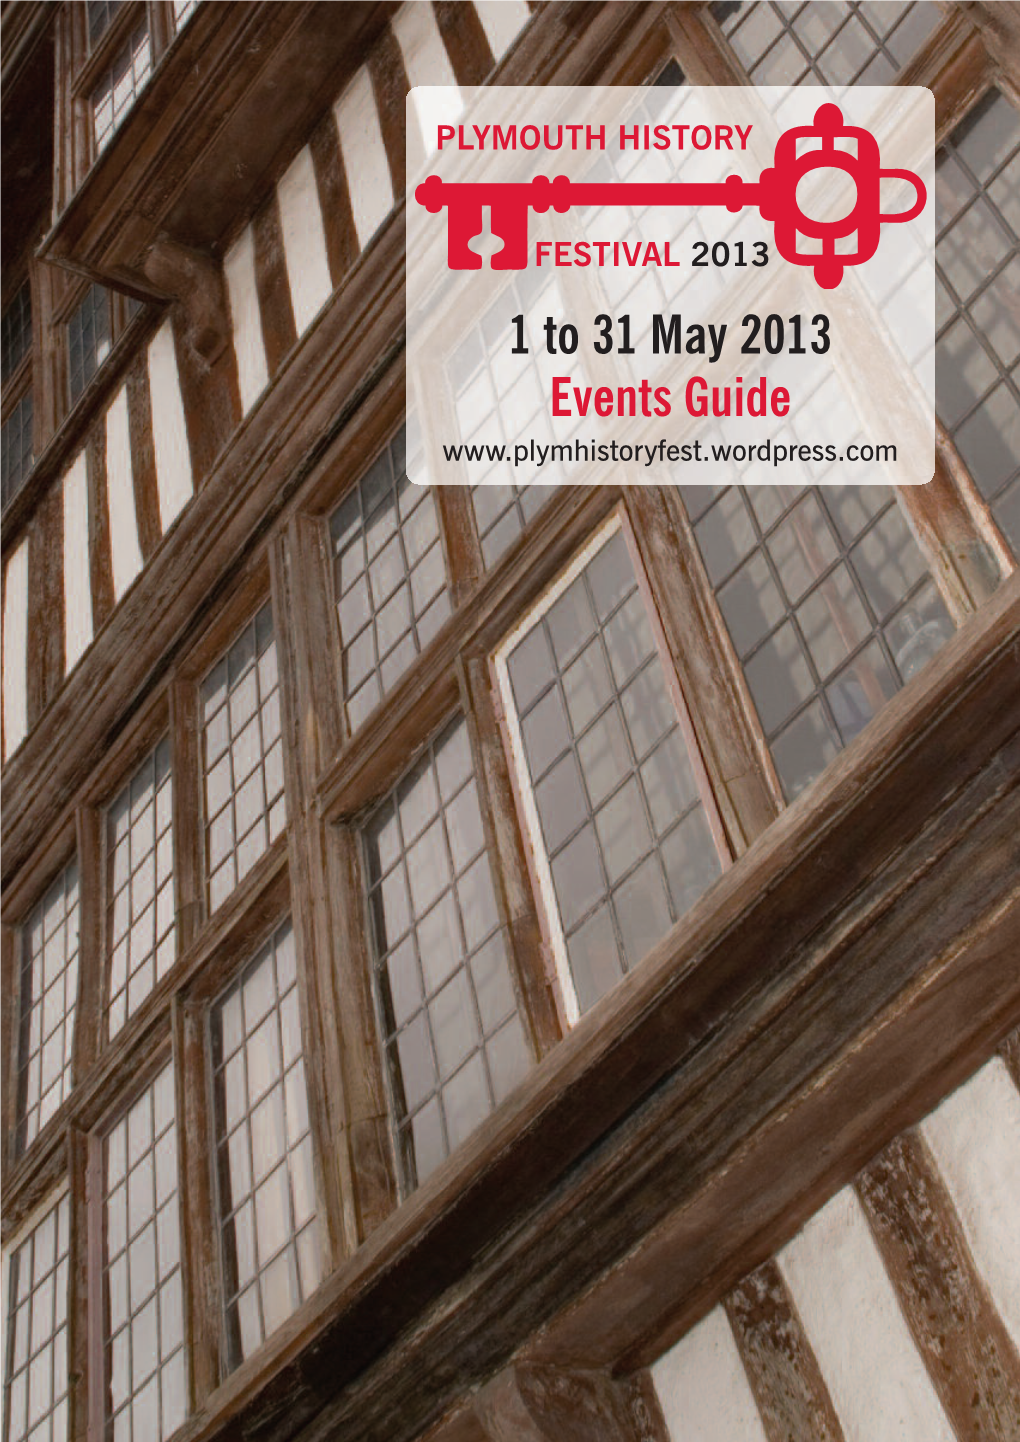 1 to 31 May 2013 Events Guide